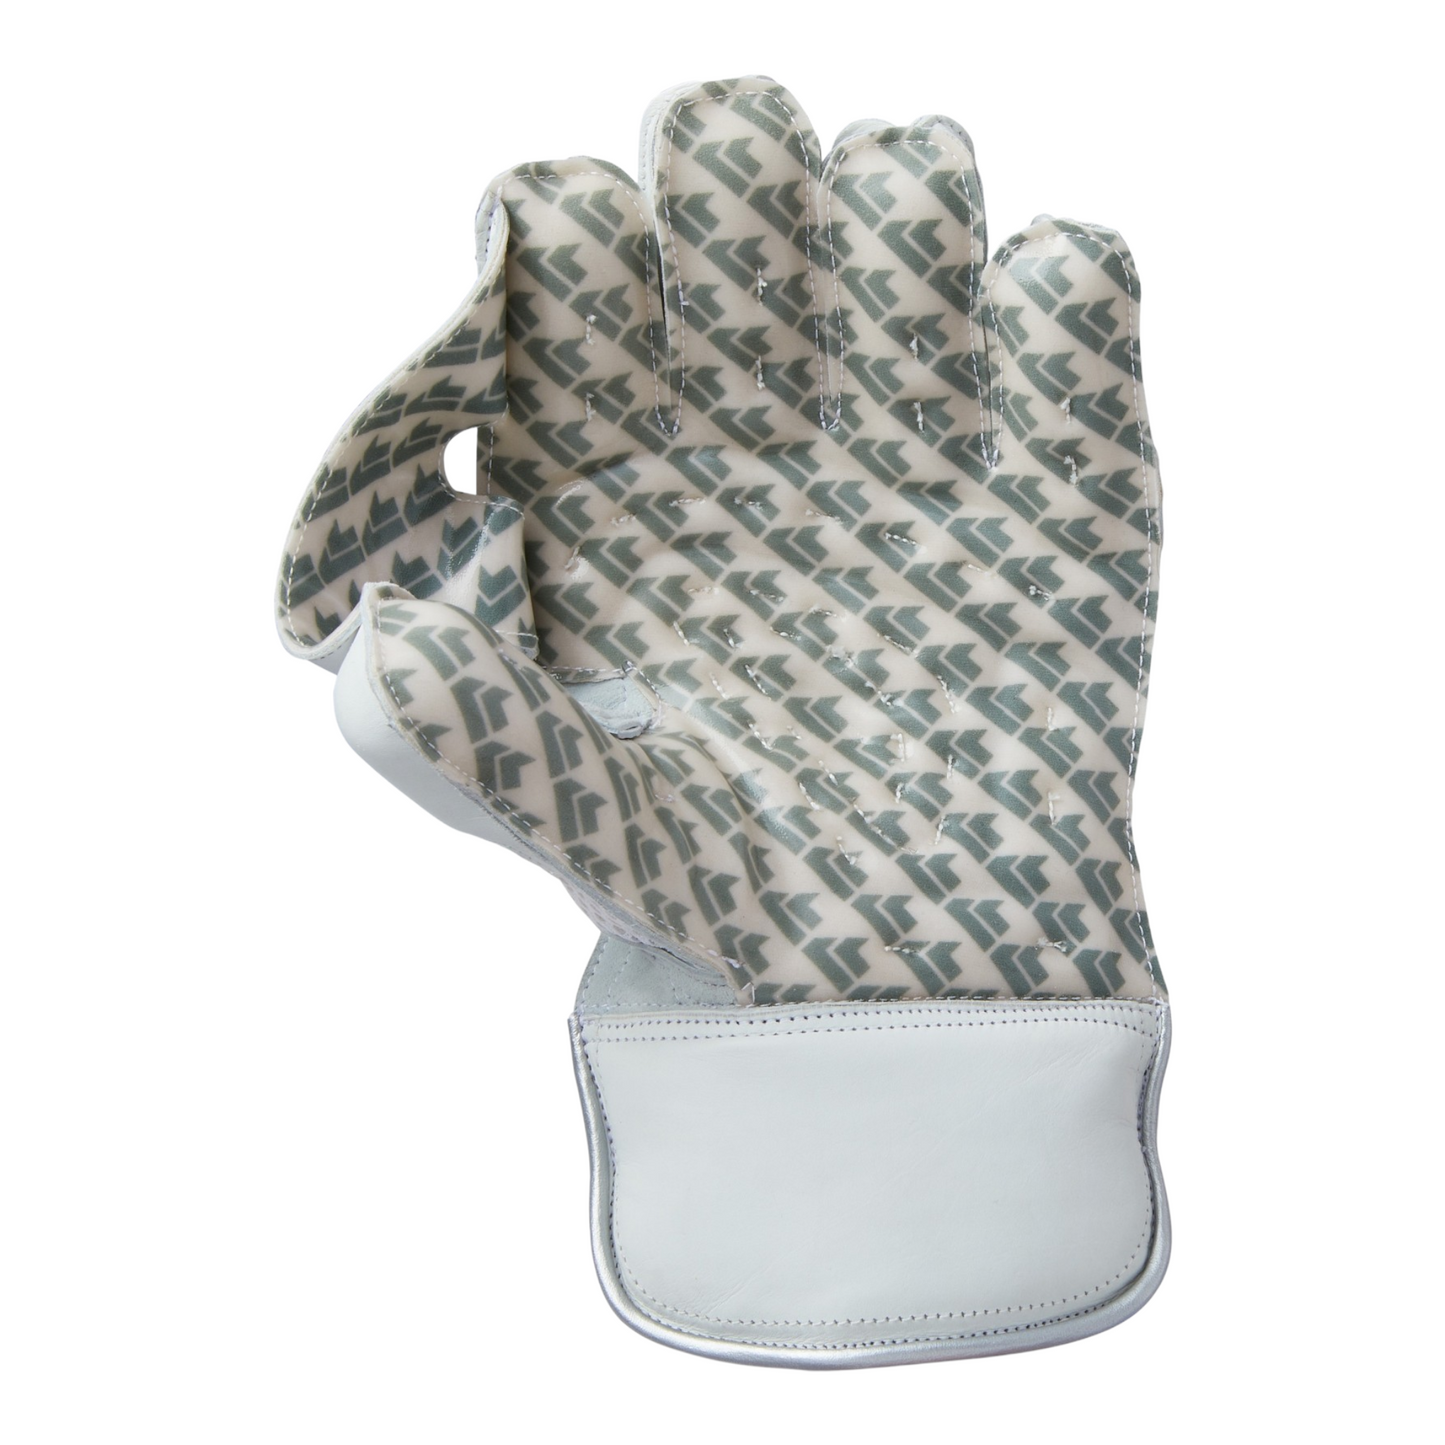 Gunn and Moore ORIGINAL LE WK GLOVES - Adult only